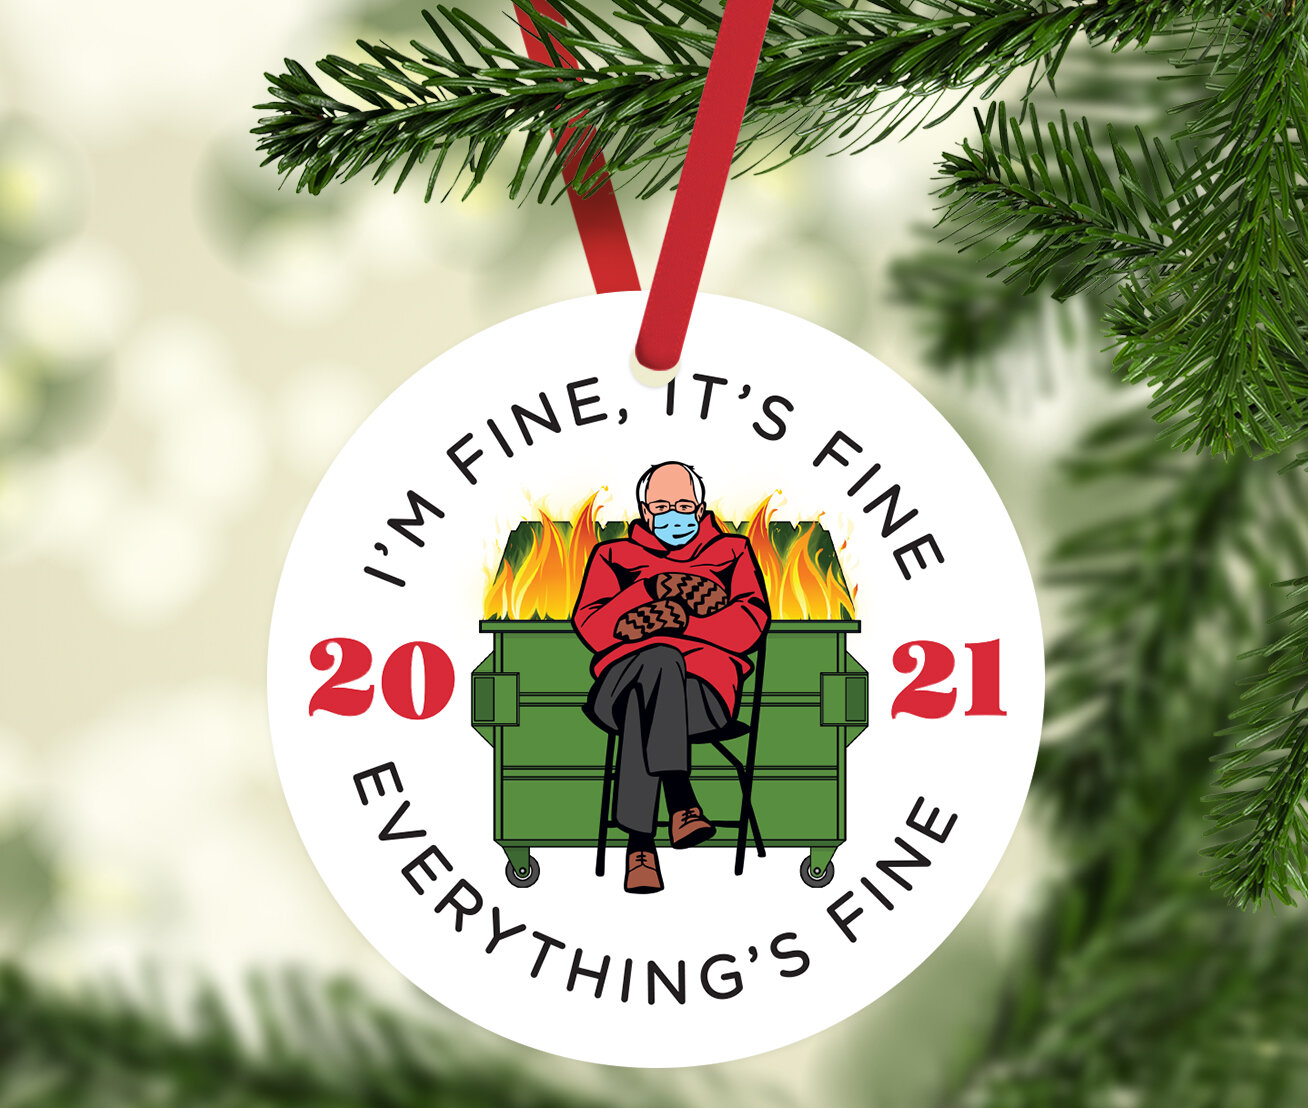 Koyal Wholesale Funny Christmas Ornaments Bernie Sanders Mittens I'm Fine, It's Fine Everything's Fine Dumpster Fire Round Metal Ornament With And Bag Keepsake White Elephant 1-Pack Wayfair